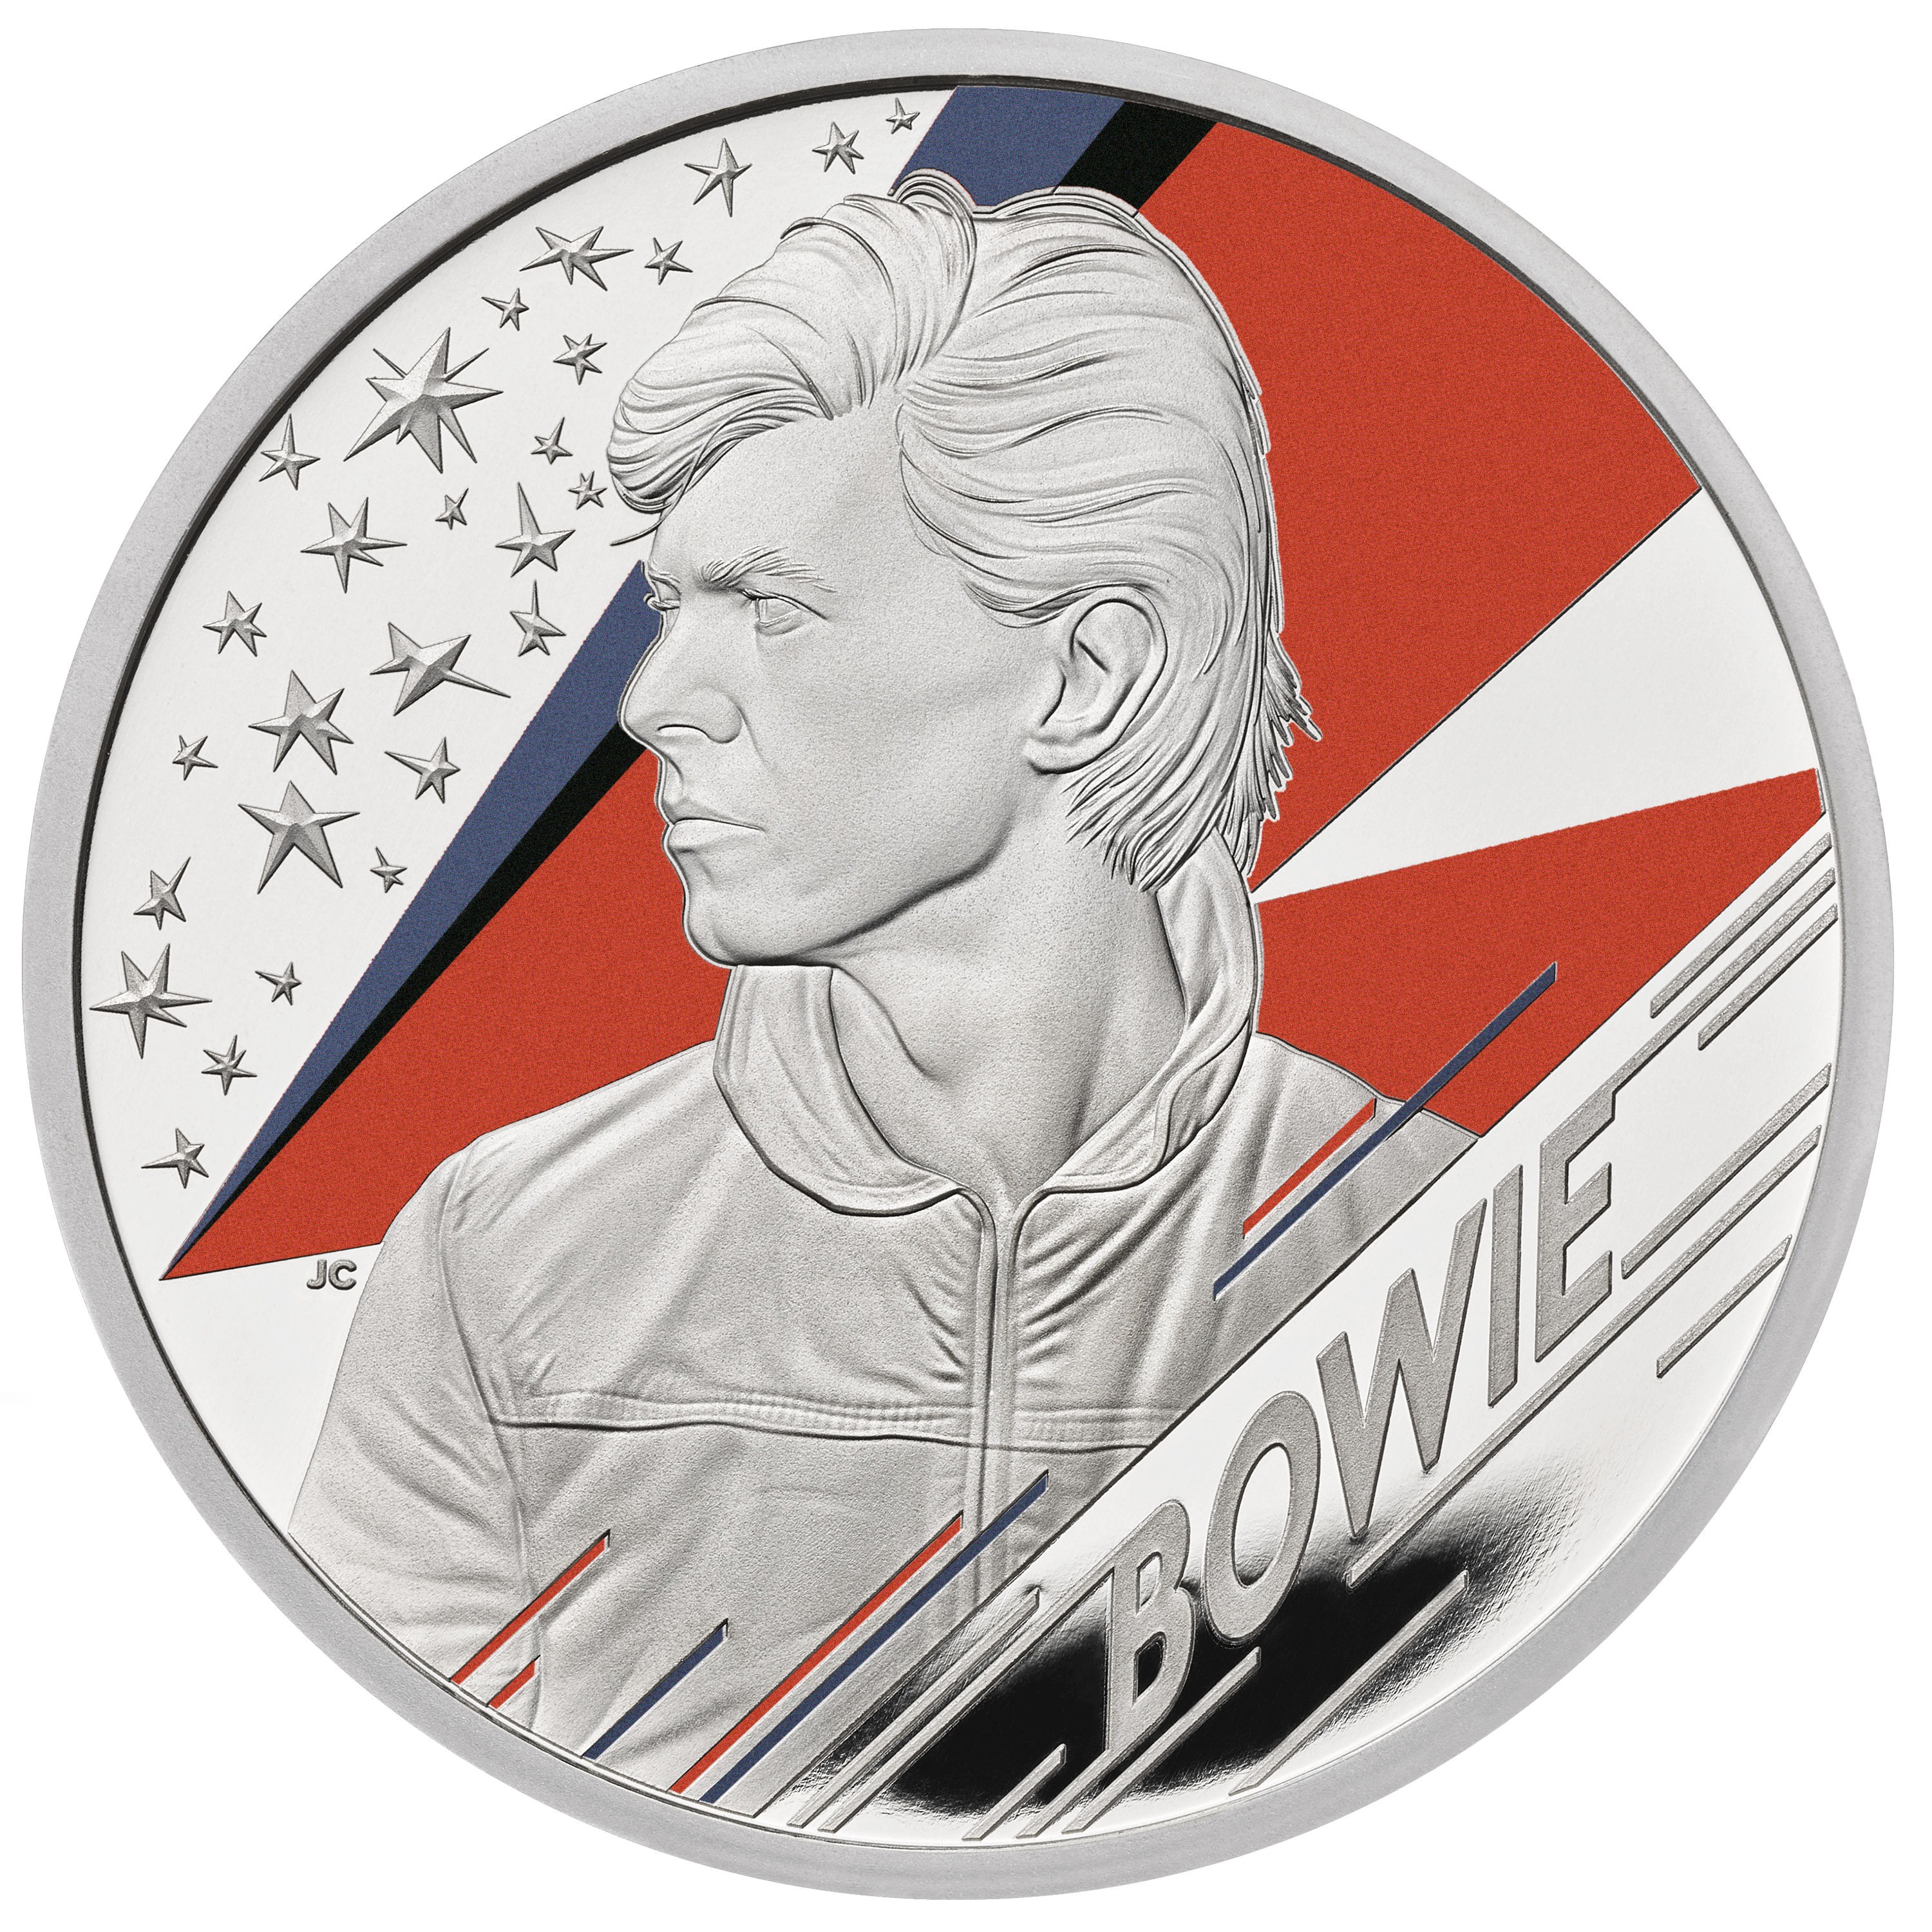 David Bowie one ounce silver proof coin